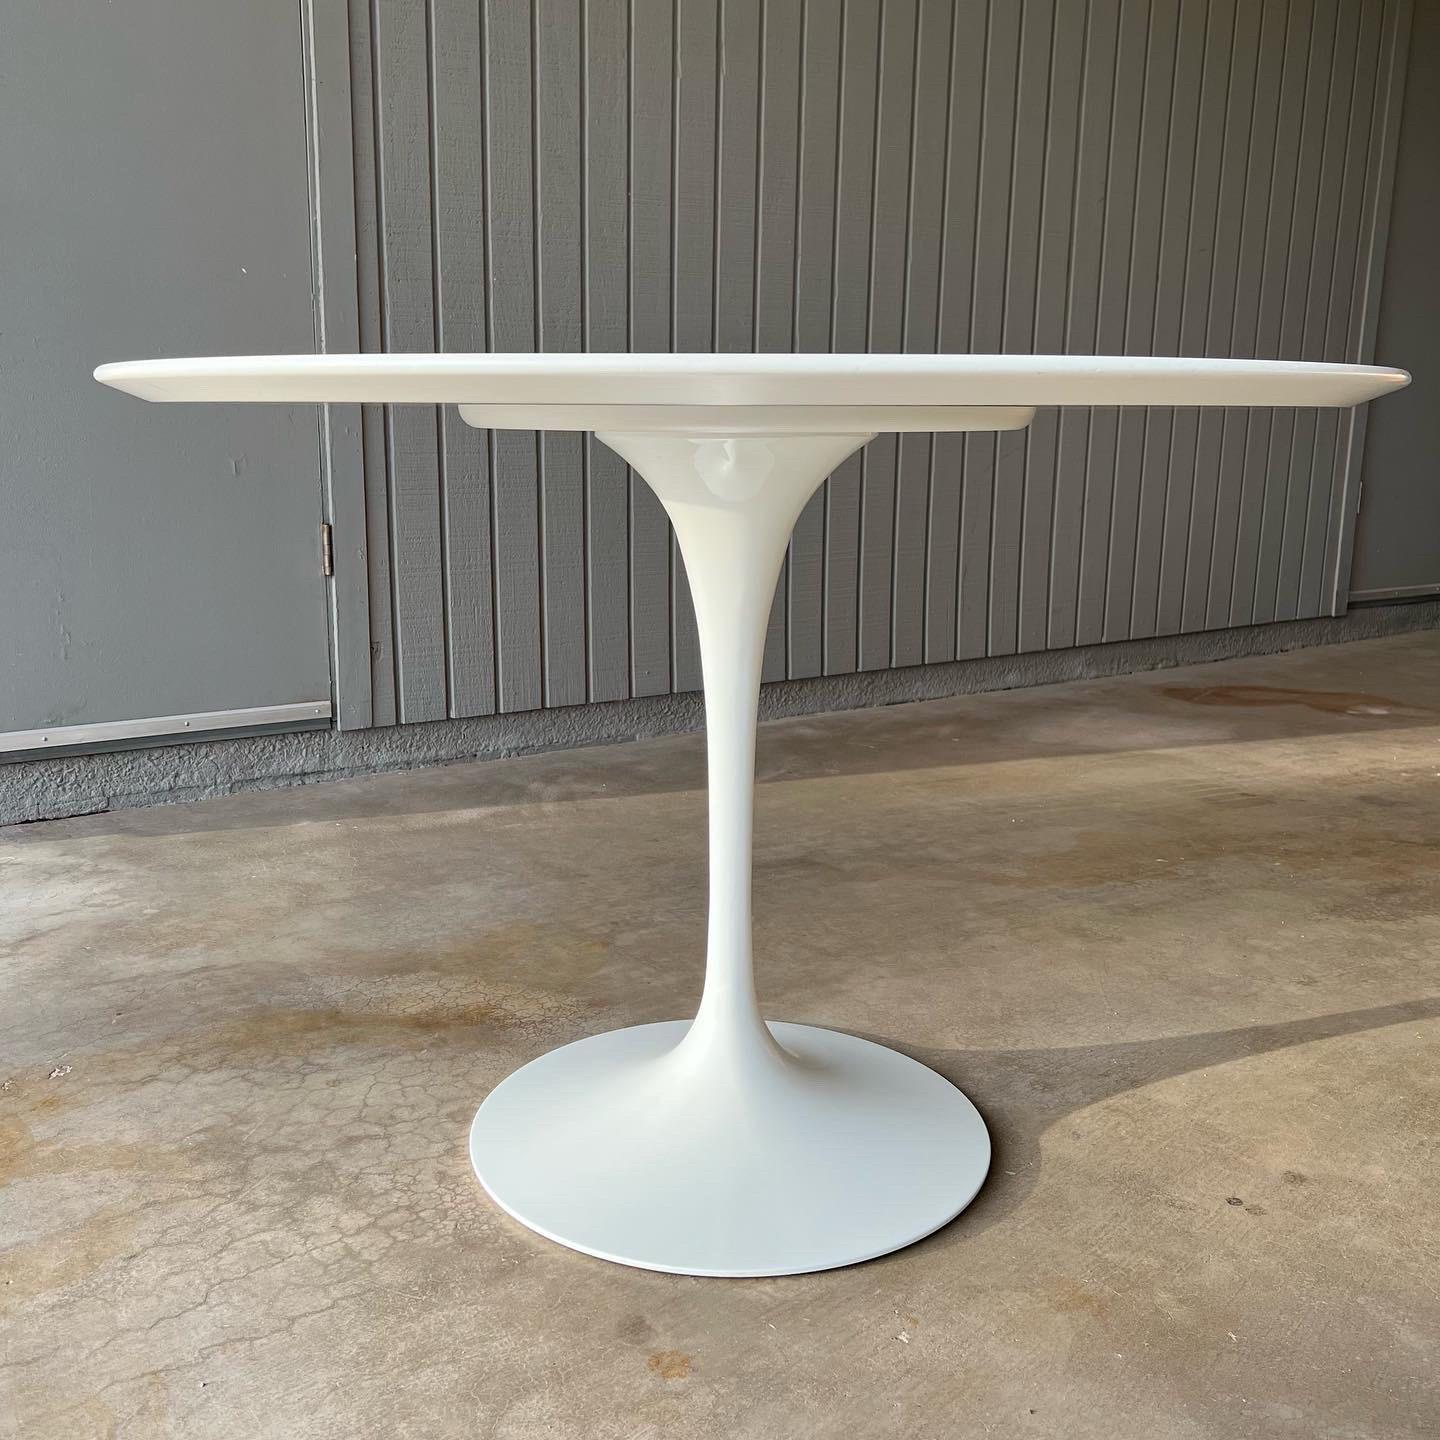 a mid century modern icon, the Saarinen dining (tulip) table was designed by Eero Saarinen in 1956 for Knoll’s Pedestal Collection. This is the 42” round version with a white base and white laminate top, and it is in excellent condition. The table